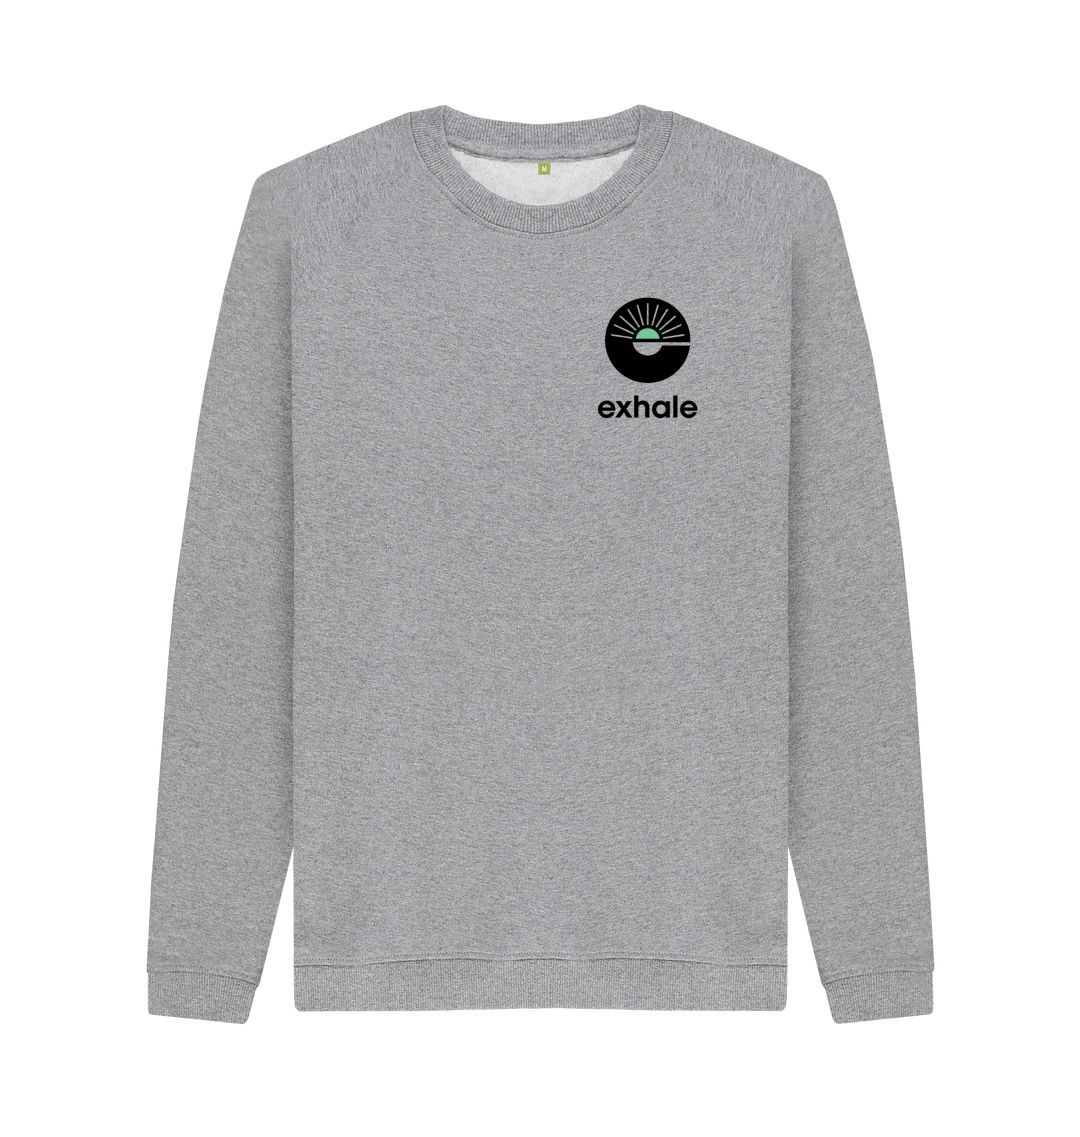 Grey sweater with small full logo